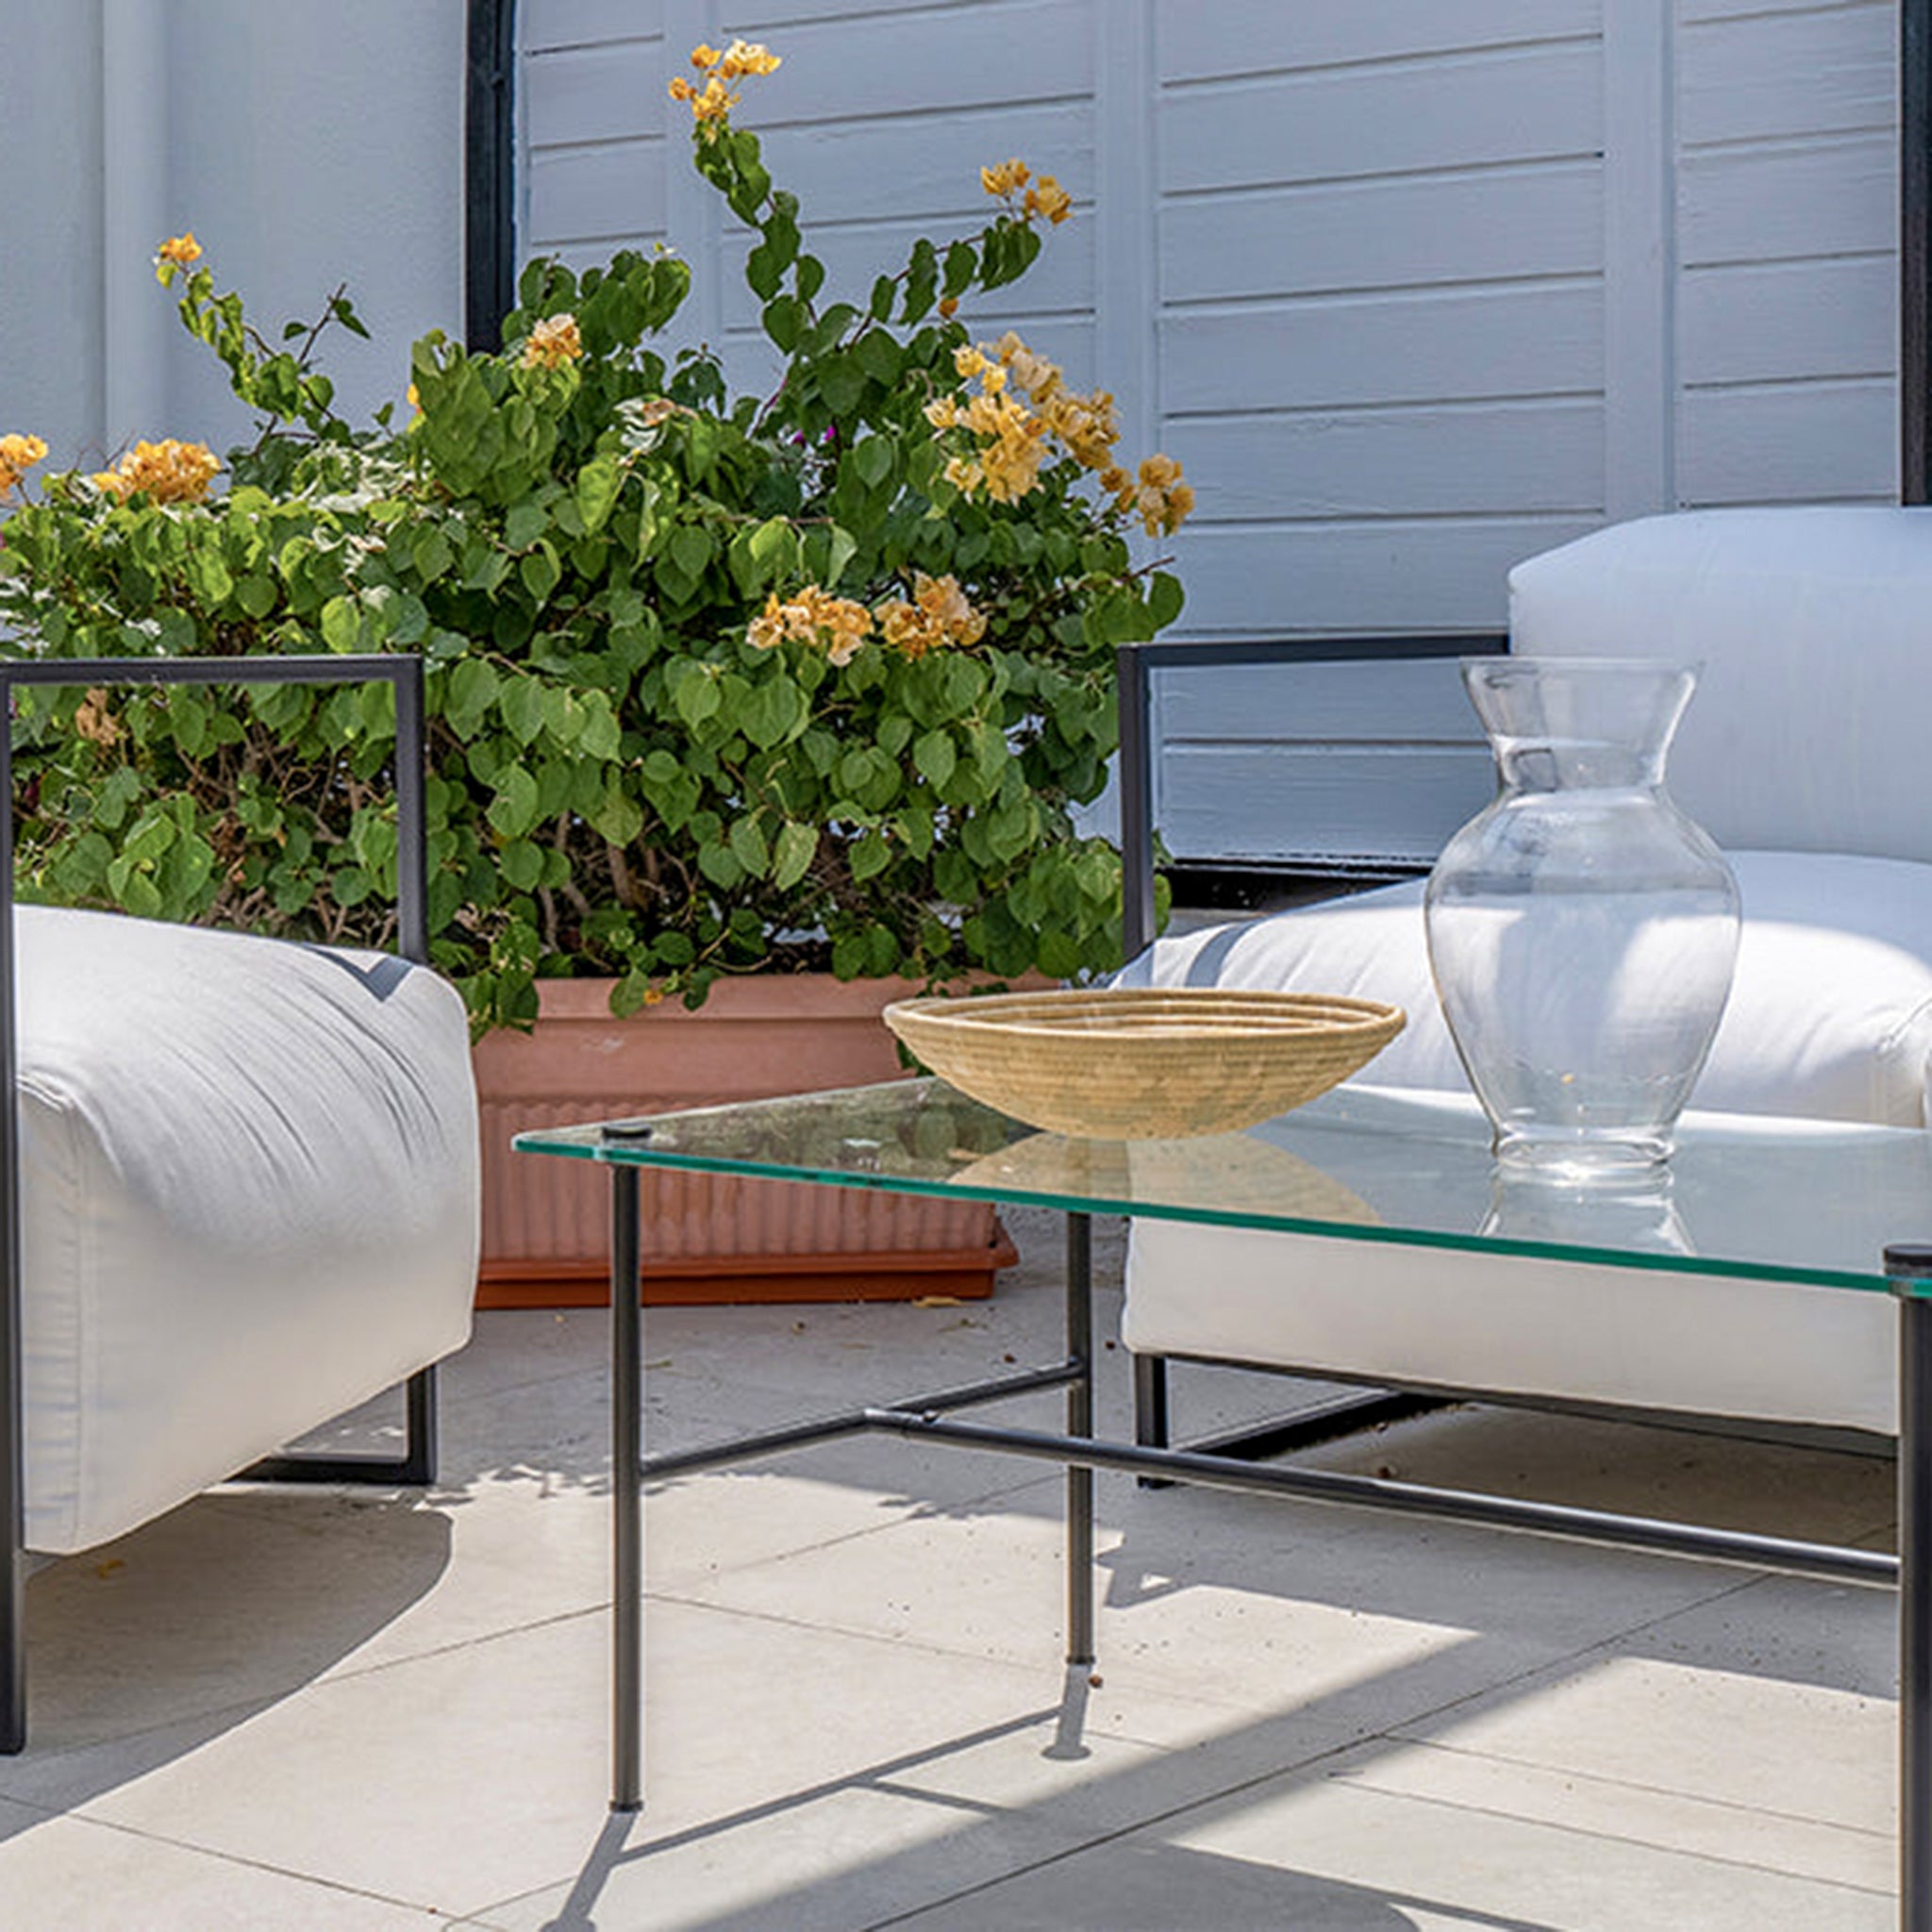 Weatherproof white Dexter outdoor sofa in UV-protected fabric for lasting comfort on your patio.